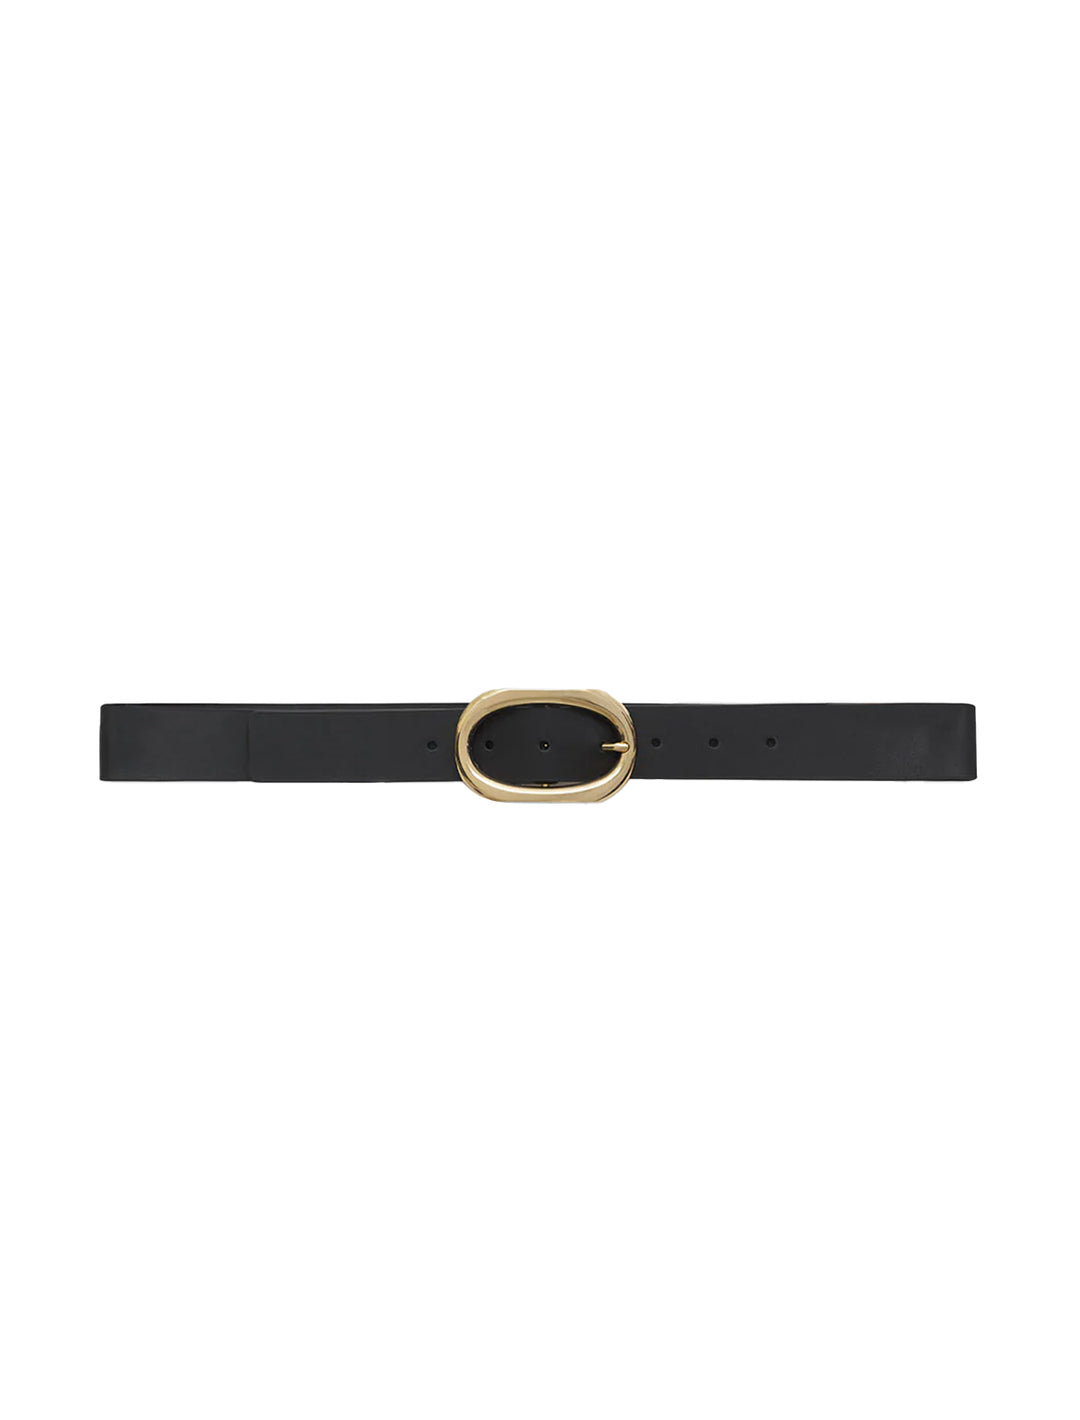 Laid out view of Anine Bing's signature link belt in black.